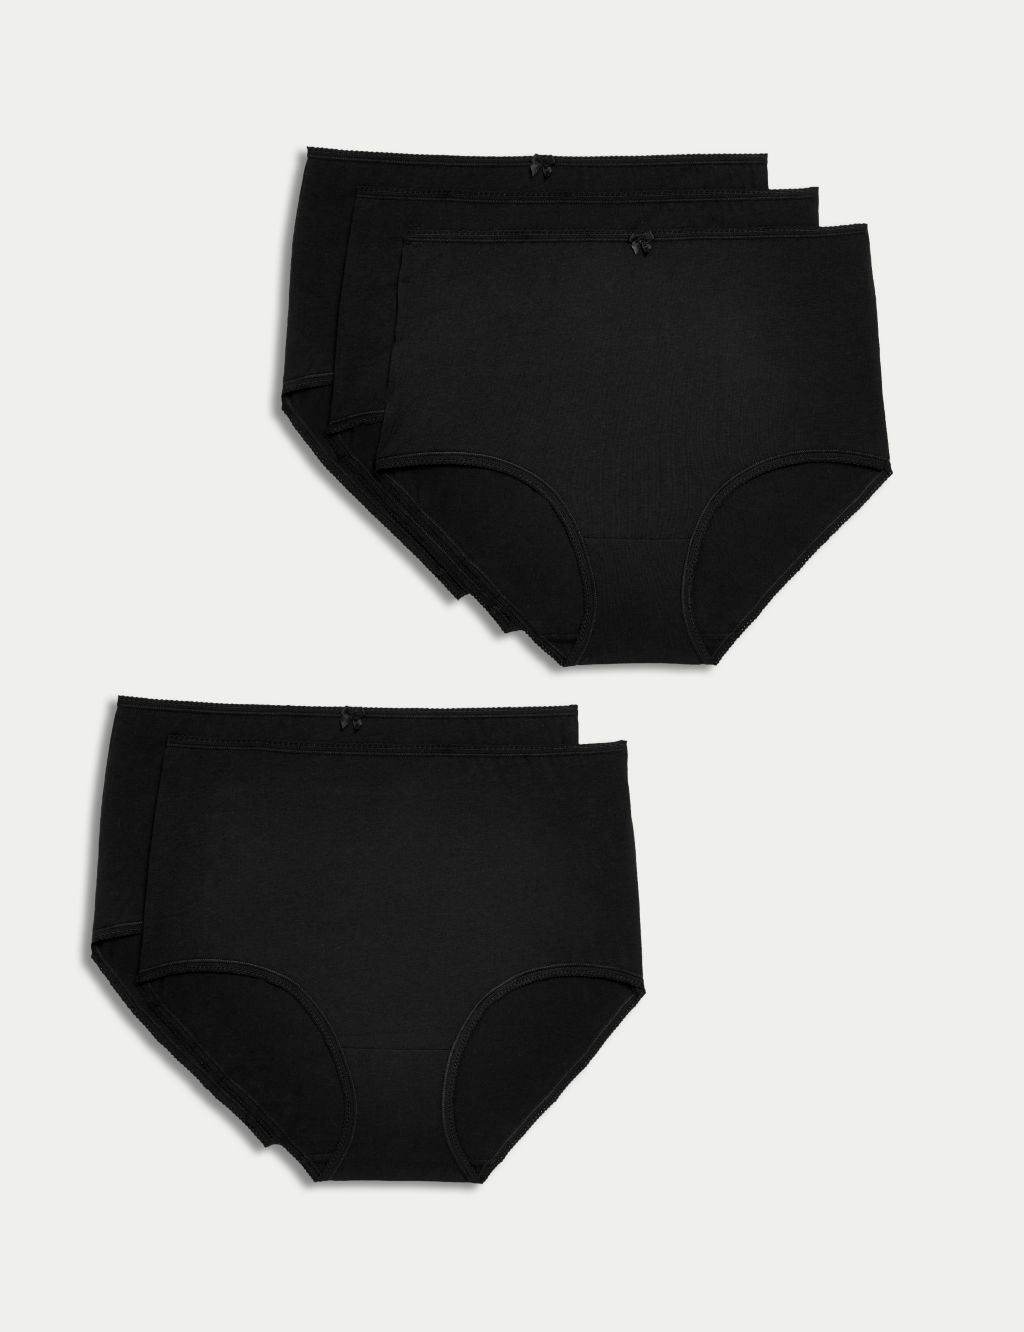 Yacht & Smith Womens Cotton Lycra Underwear Black Panty Briefs In Bulk, 95%  Cotton Soft Size X Small - Samples - at 